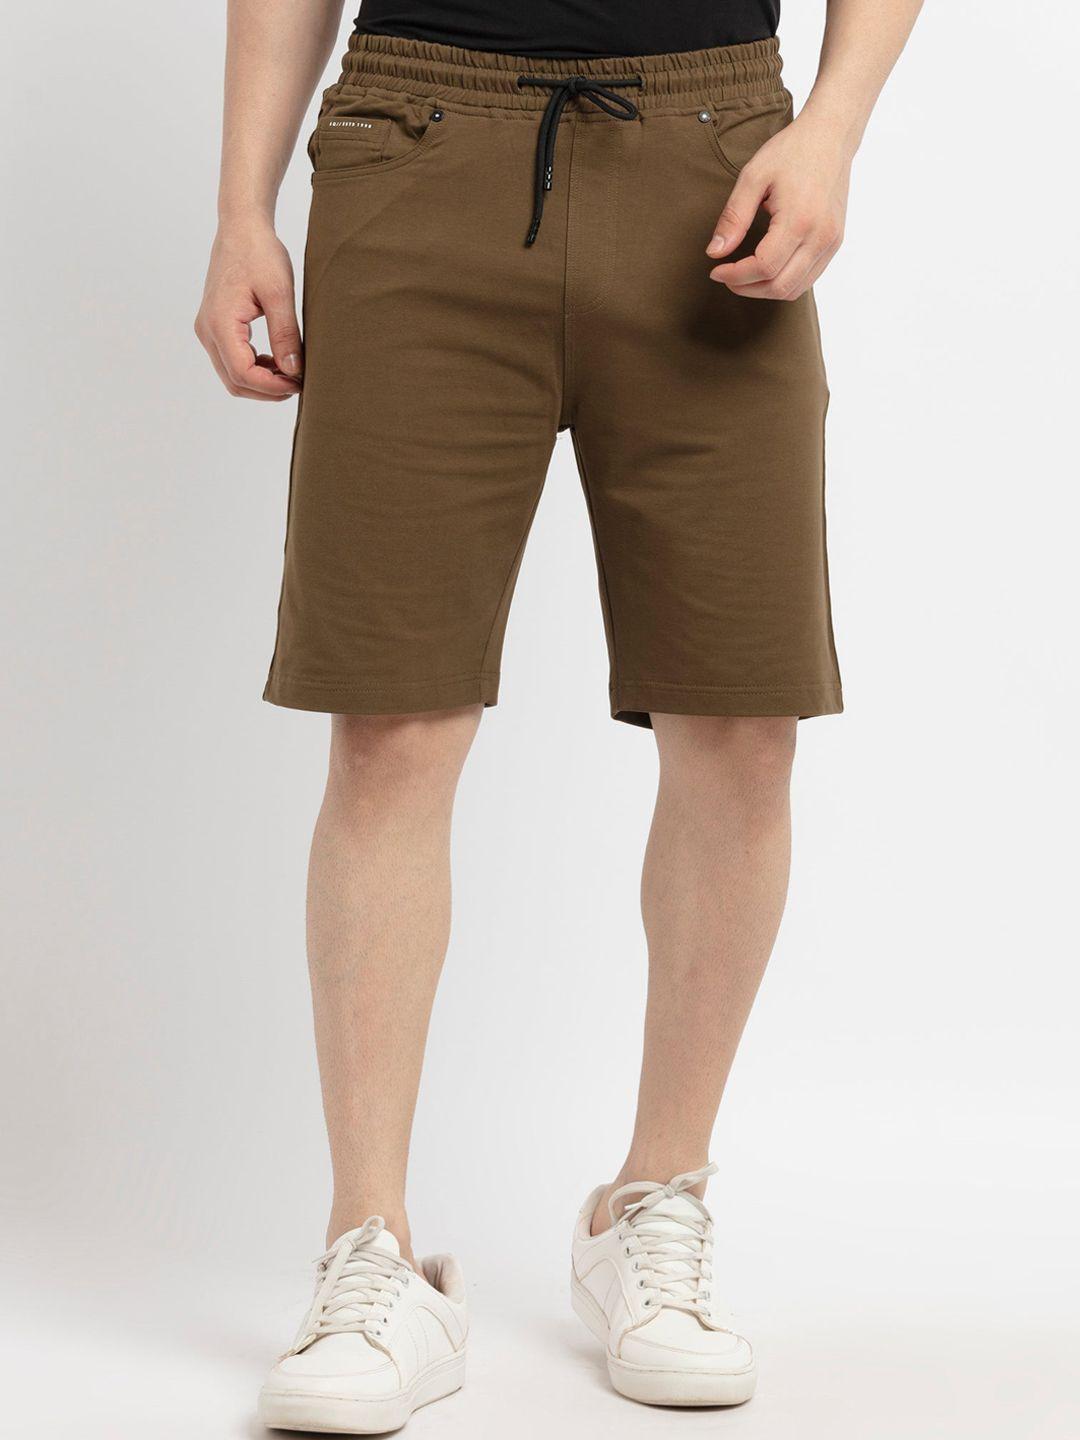 status quo men olive green solid cotton shorts